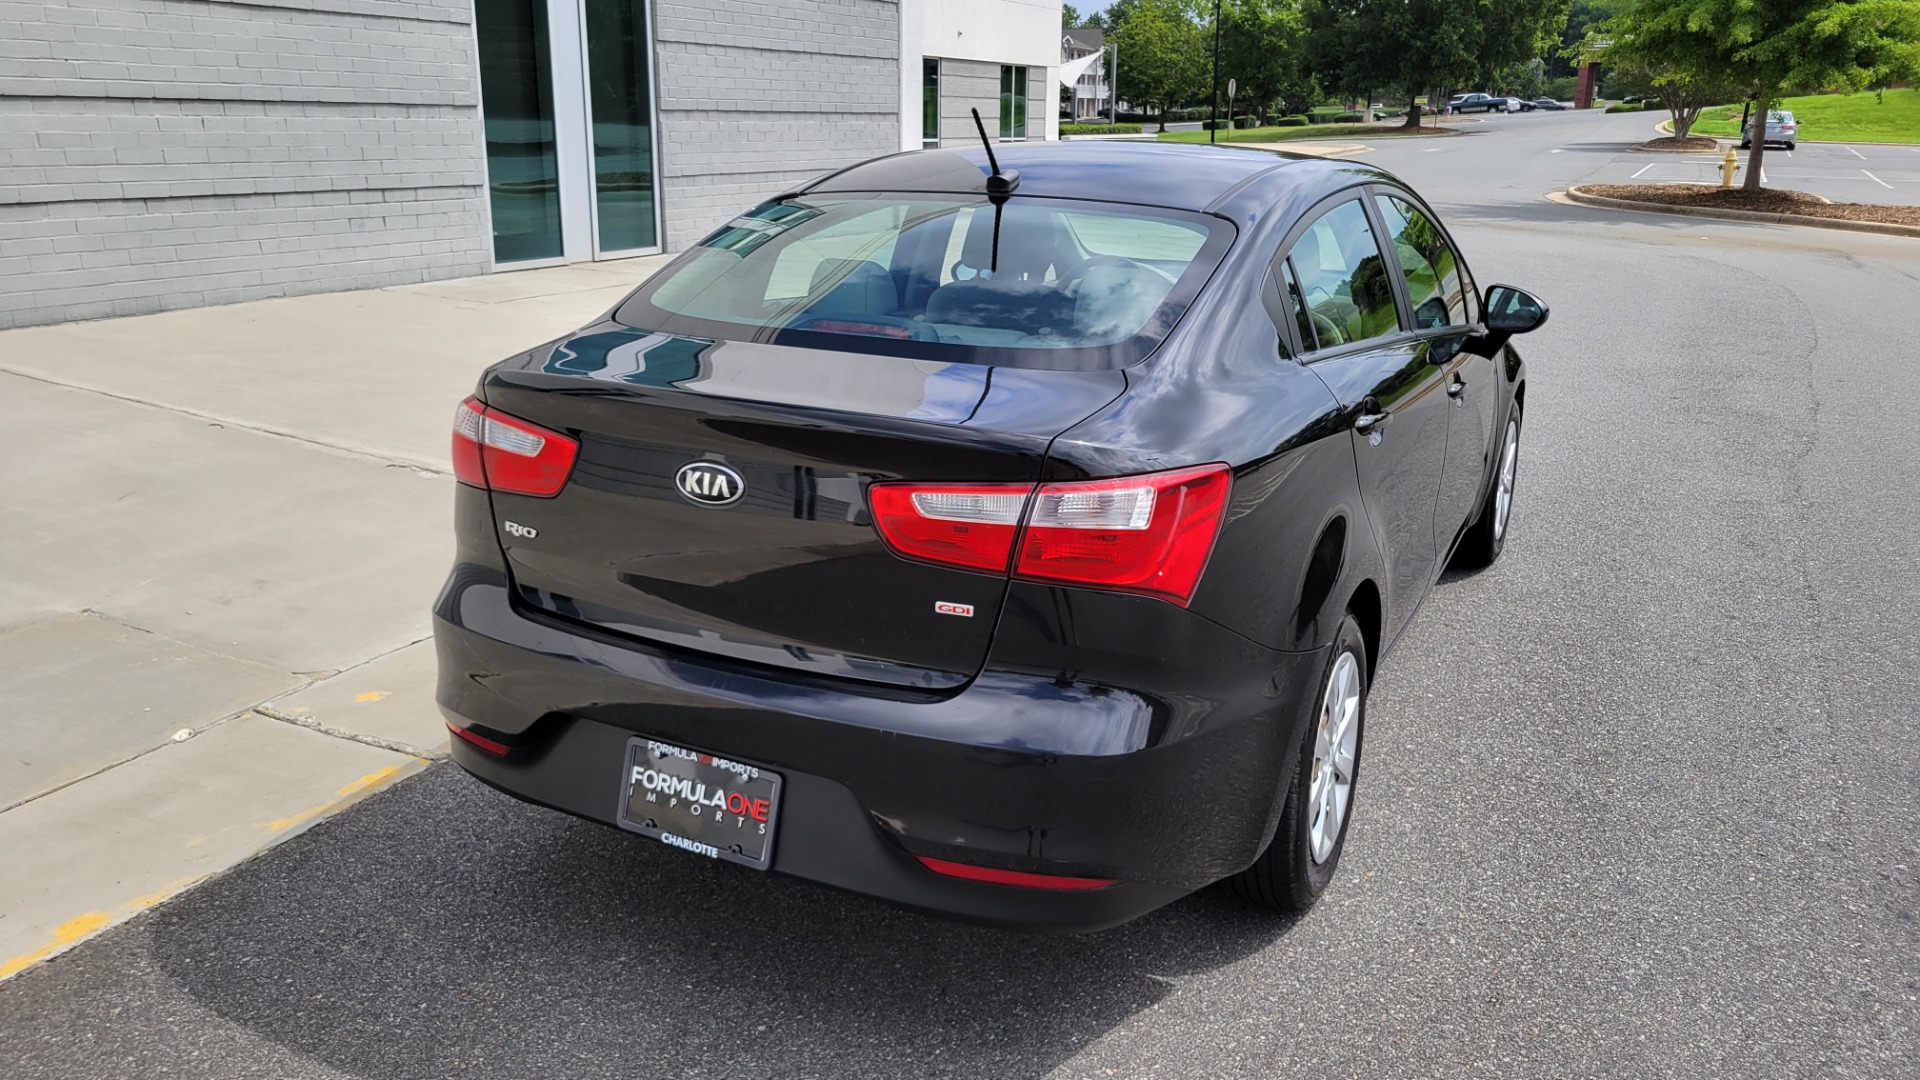 Used 2017 Kia RIO LX SEDAN / 1.6L 4-CYL / AUTO / POWER PACKAGE / 36MPG for sale $12,795 at Formula Imports in Charlotte NC 28227 9